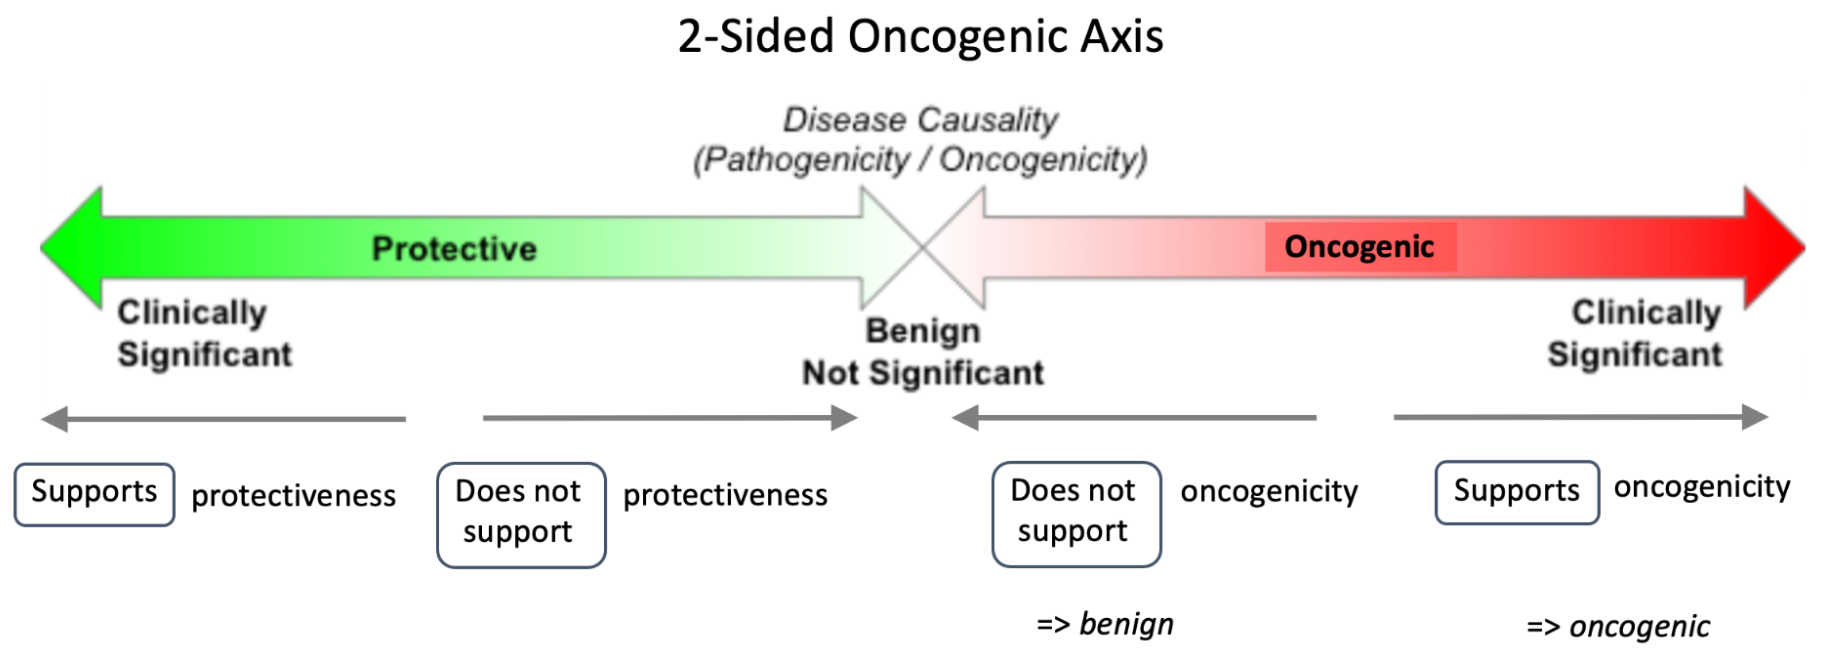 The Oncogenic Evidence Item Significance relates either to cancer protectiveness or oncogenicity.